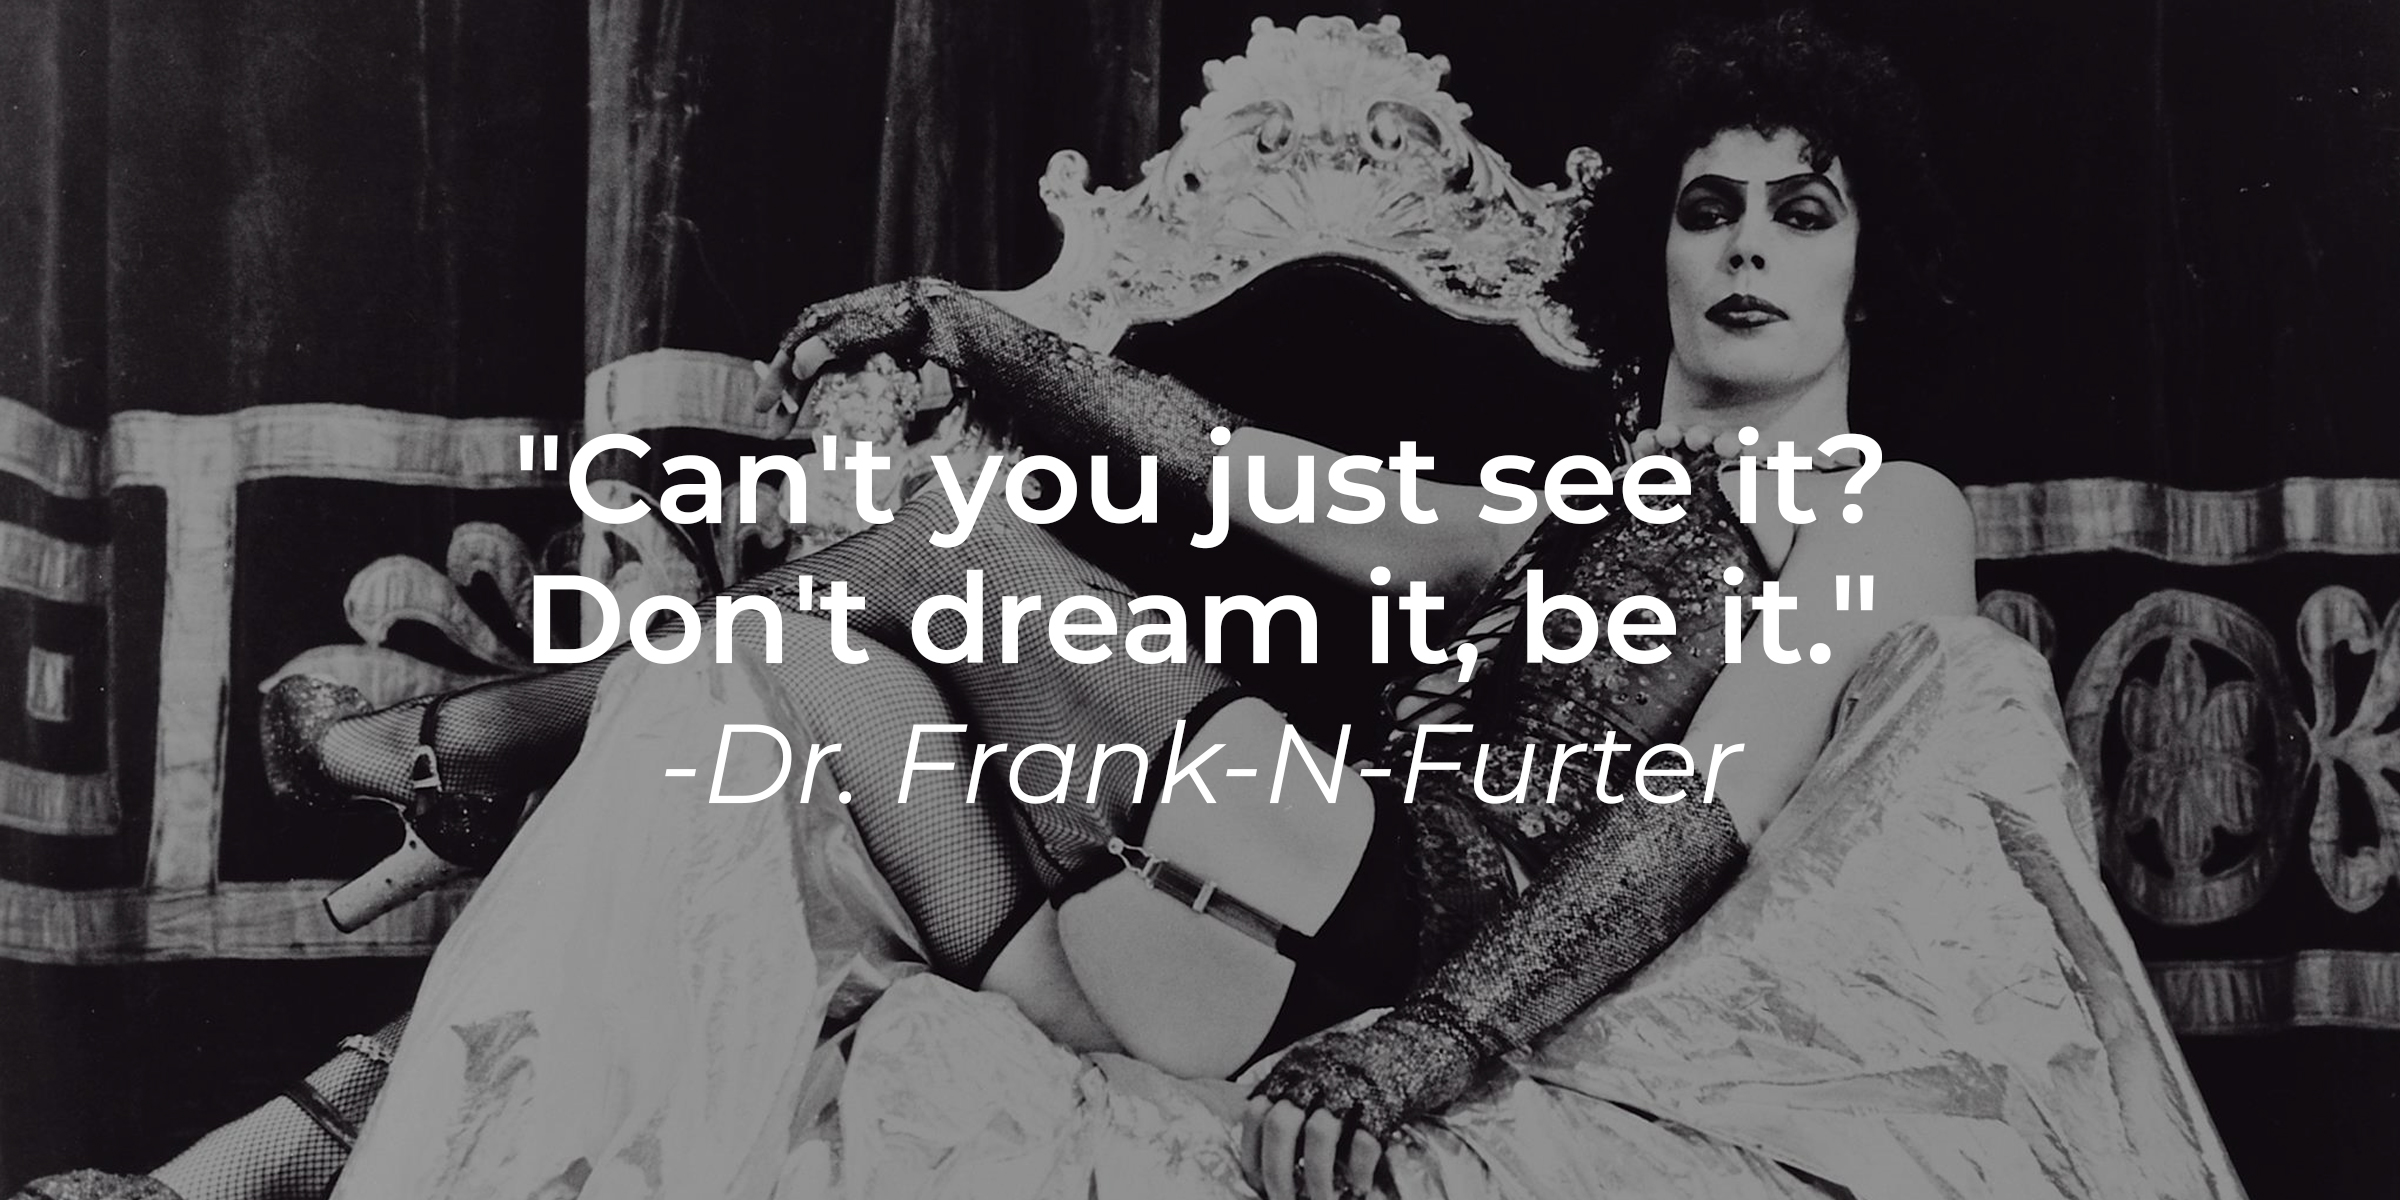 Dr. Frank-N-Furter's quote: "Can't you just see it? Don't dream it, be it." | Source: Facebook/TheRockyHorrorPictureShowOfficial